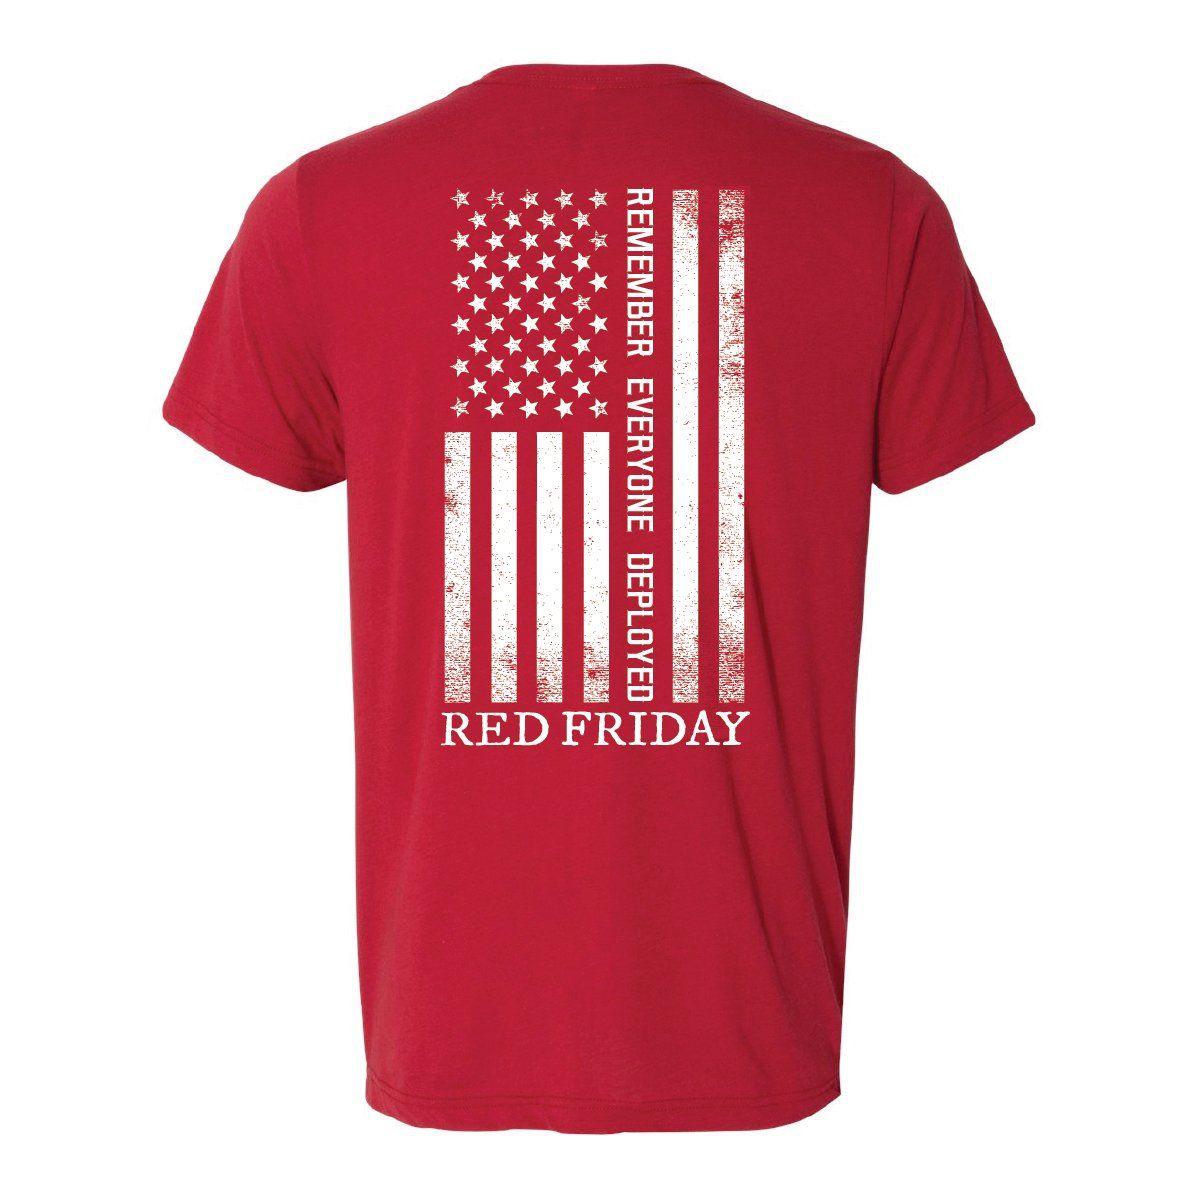 Red Friday Logo - Red Friday T-shirt - Folds of Honor